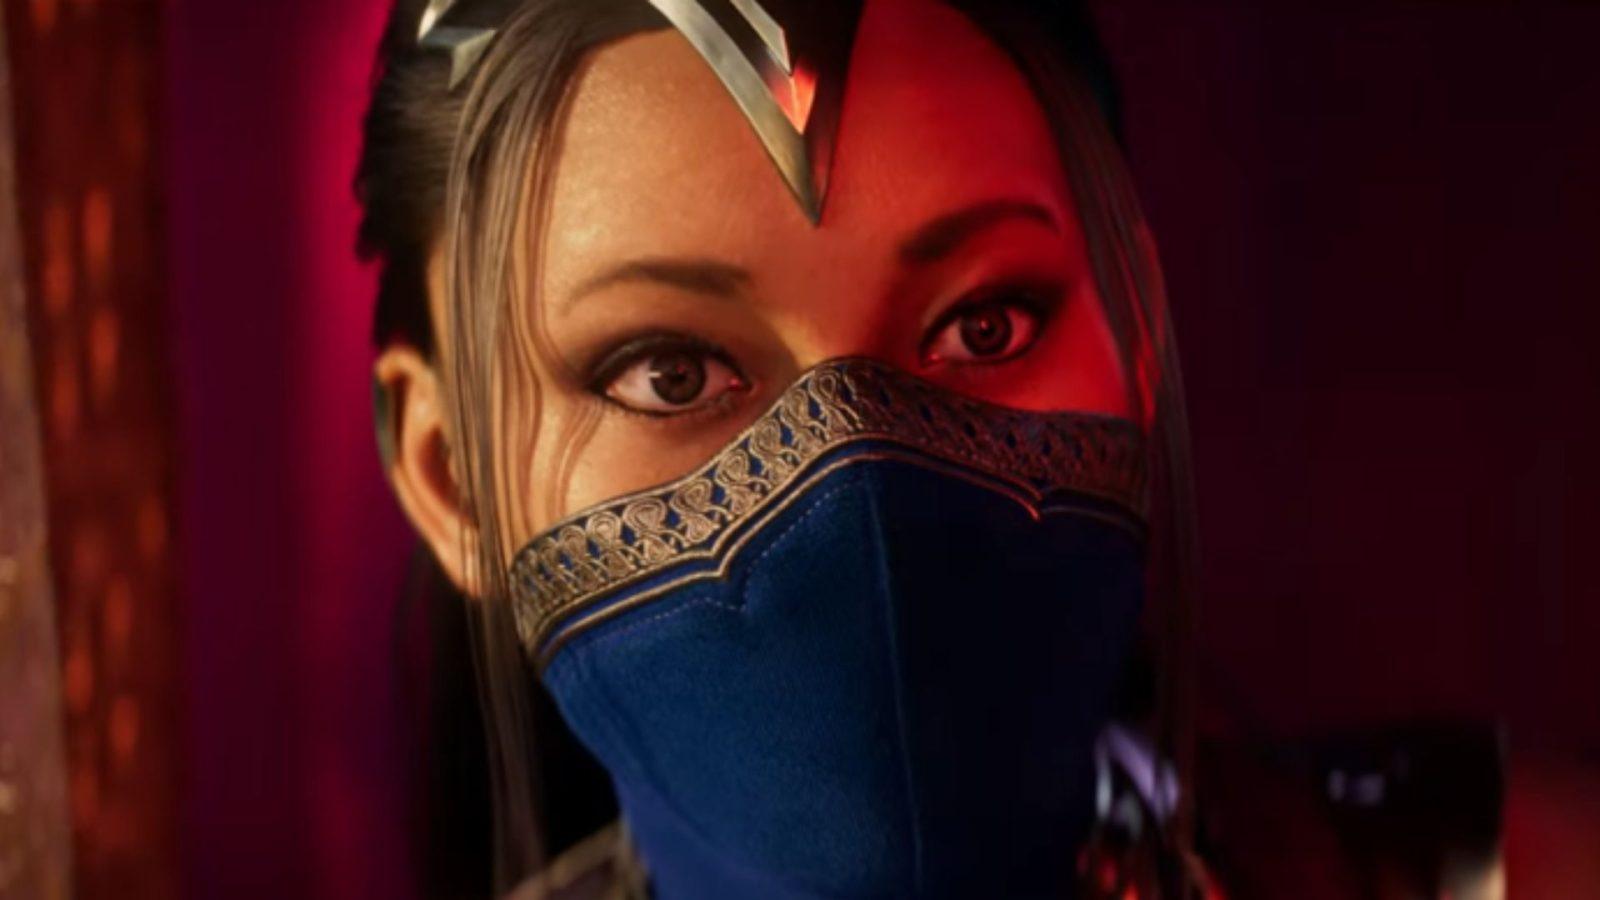 Mortal Kombat 1 Reveals Shao Kahn and Sindel as Playable Fighters